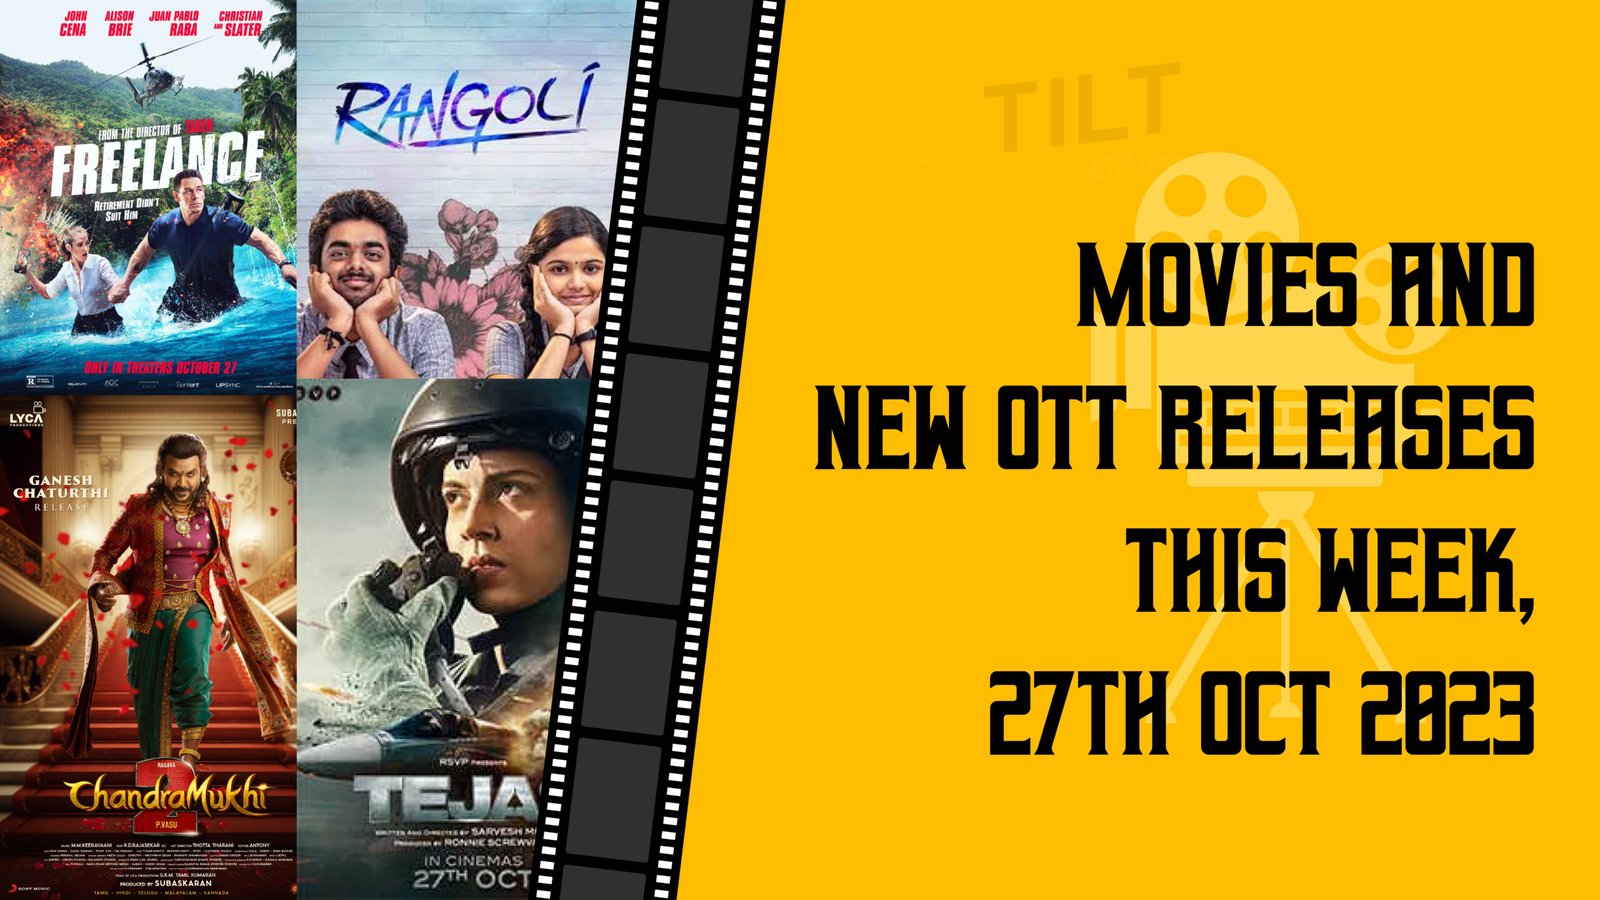 Movies and New OTT Releases this Week, 27th Oct 2023 - Triangle Tilt